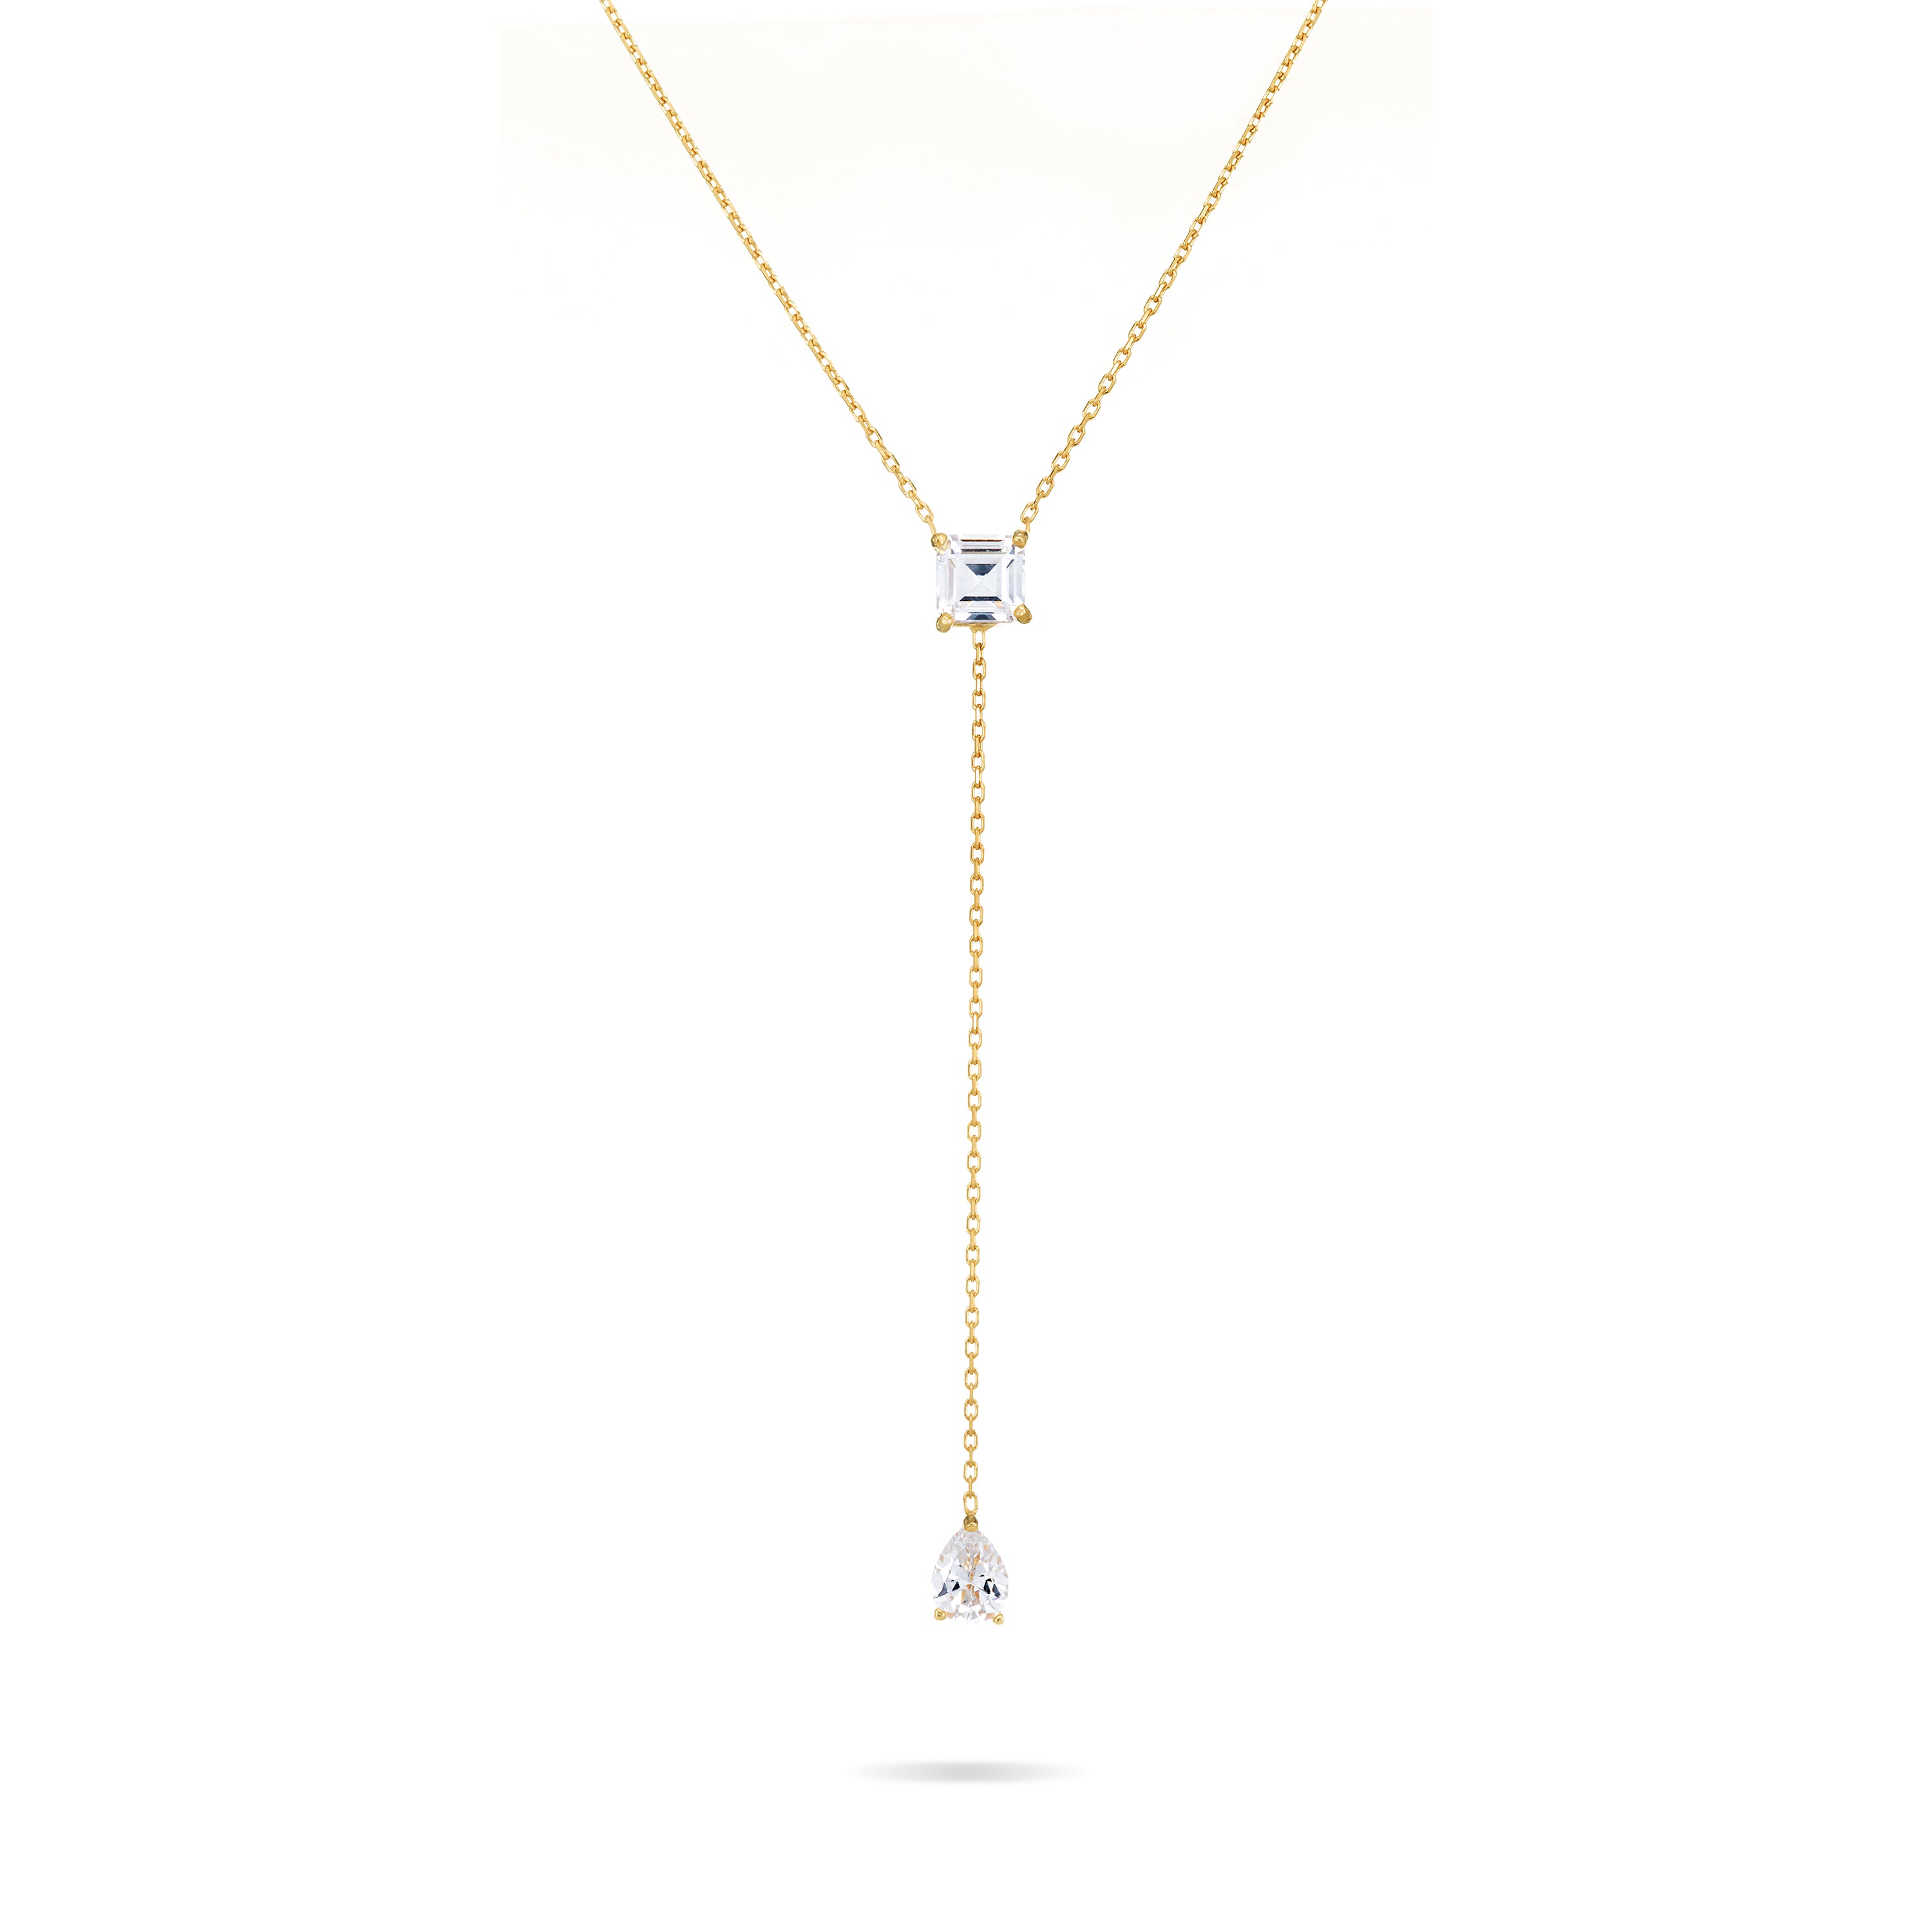 Teardrop And Square Lariat Chain Necklace